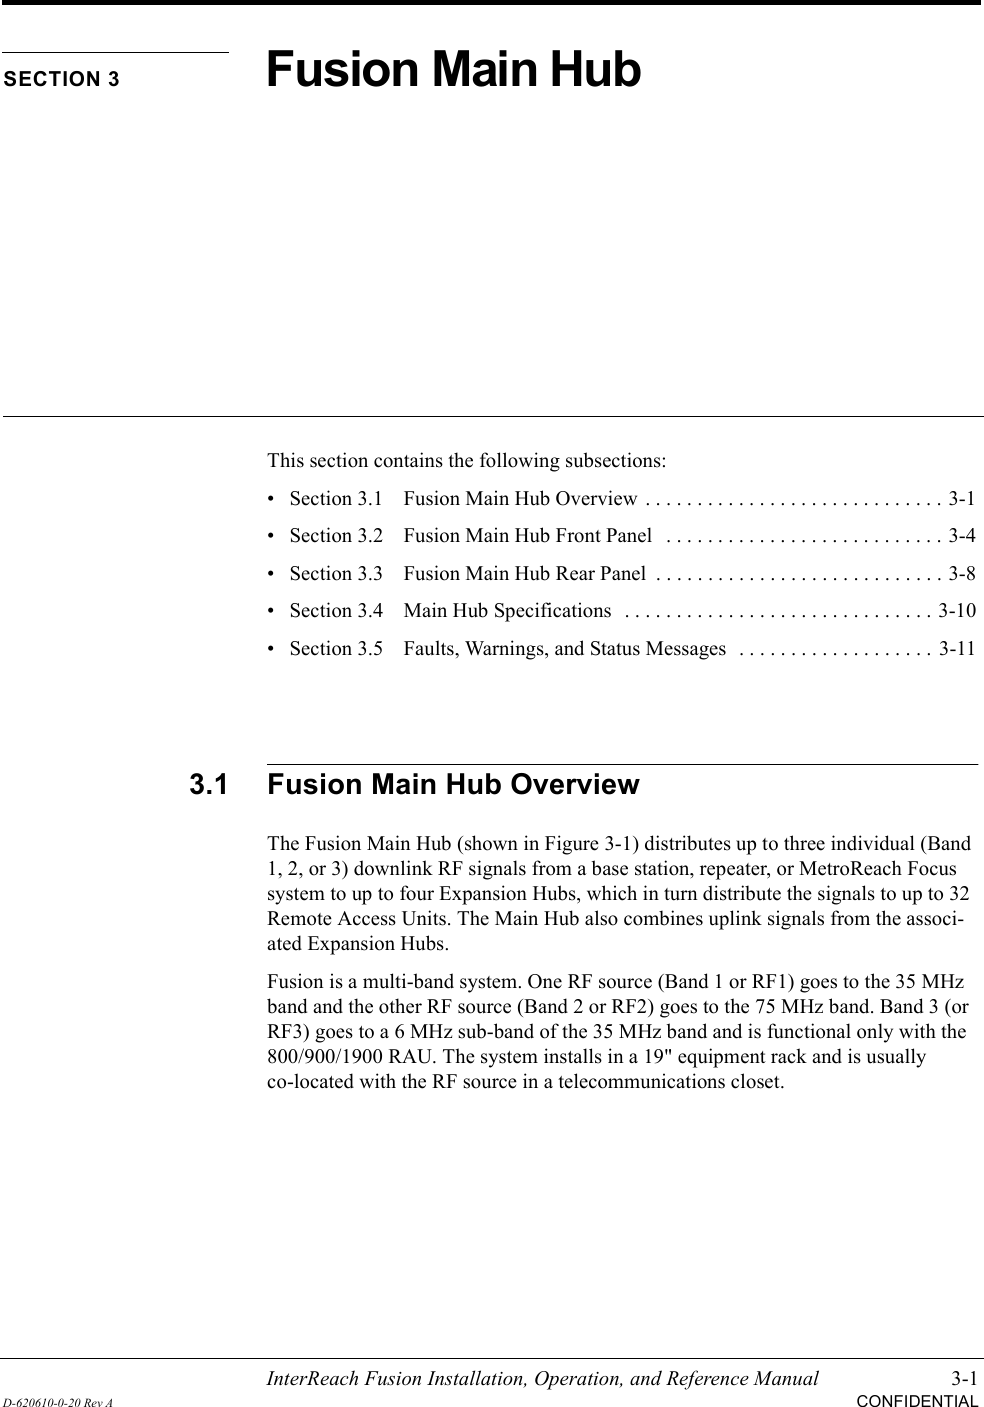 InterReach Fusion Installation, Operation, and Reference Manual 3-1D-620610-0-20 Rev ACONFIDENTIALSECTION 3Fusion Main HubThis section contains the following subsections:• Section 3.1   Fusion Main Hub Overview . . . . . . . . . . . . . . . . . . . . . . . . . . . . . 3-1• Section 3.2   Fusion Main Hub Front Panel   . . . . . . . . . . . . . . . . . . . . . . . . . . . 3-4• Section 3.3   Fusion Main Hub Rear Panel  . . . . . . . . . . . . . . . . . . . . . . . . . . . . 3-8• Section 3.4   Main Hub Specifications   . . . . . . . . . . . . . . . . . . . . . . . . . . . . . . 3-10• Section 3.5   Faults, Warnings, and Status Messages  . . . . . . . . . . . . . . . . . . .  3-113.1 Fusion Main Hub OverviewThe Fusion Main Hub (shown in Figure 3-1) distributes up to three individual (Band 1, 2, or 3) downlink RF signals from a base station, repeater, or MetroReach Focus system to up to four Expansion Hubs, which in turn distribute the signals to up to 32 Remote Access Units. The Main Hub also combines uplink signals from the associ-ated Expansion Hubs.Fusion is a multi-band system. One RF source (Band 1 or RF1) goes to the 35 MHz band and the other RF source (Band 2 or RF2) goes to the 75 MHz band. Band 3 (or RF3) goes to a 6 MHz sub-band of the 35 MHz band and is functional only with the 800/900/1900 RAU. The system installs in a 19&quot; equipment rack and is usually co-located with the RF source in a telecommunications closet.